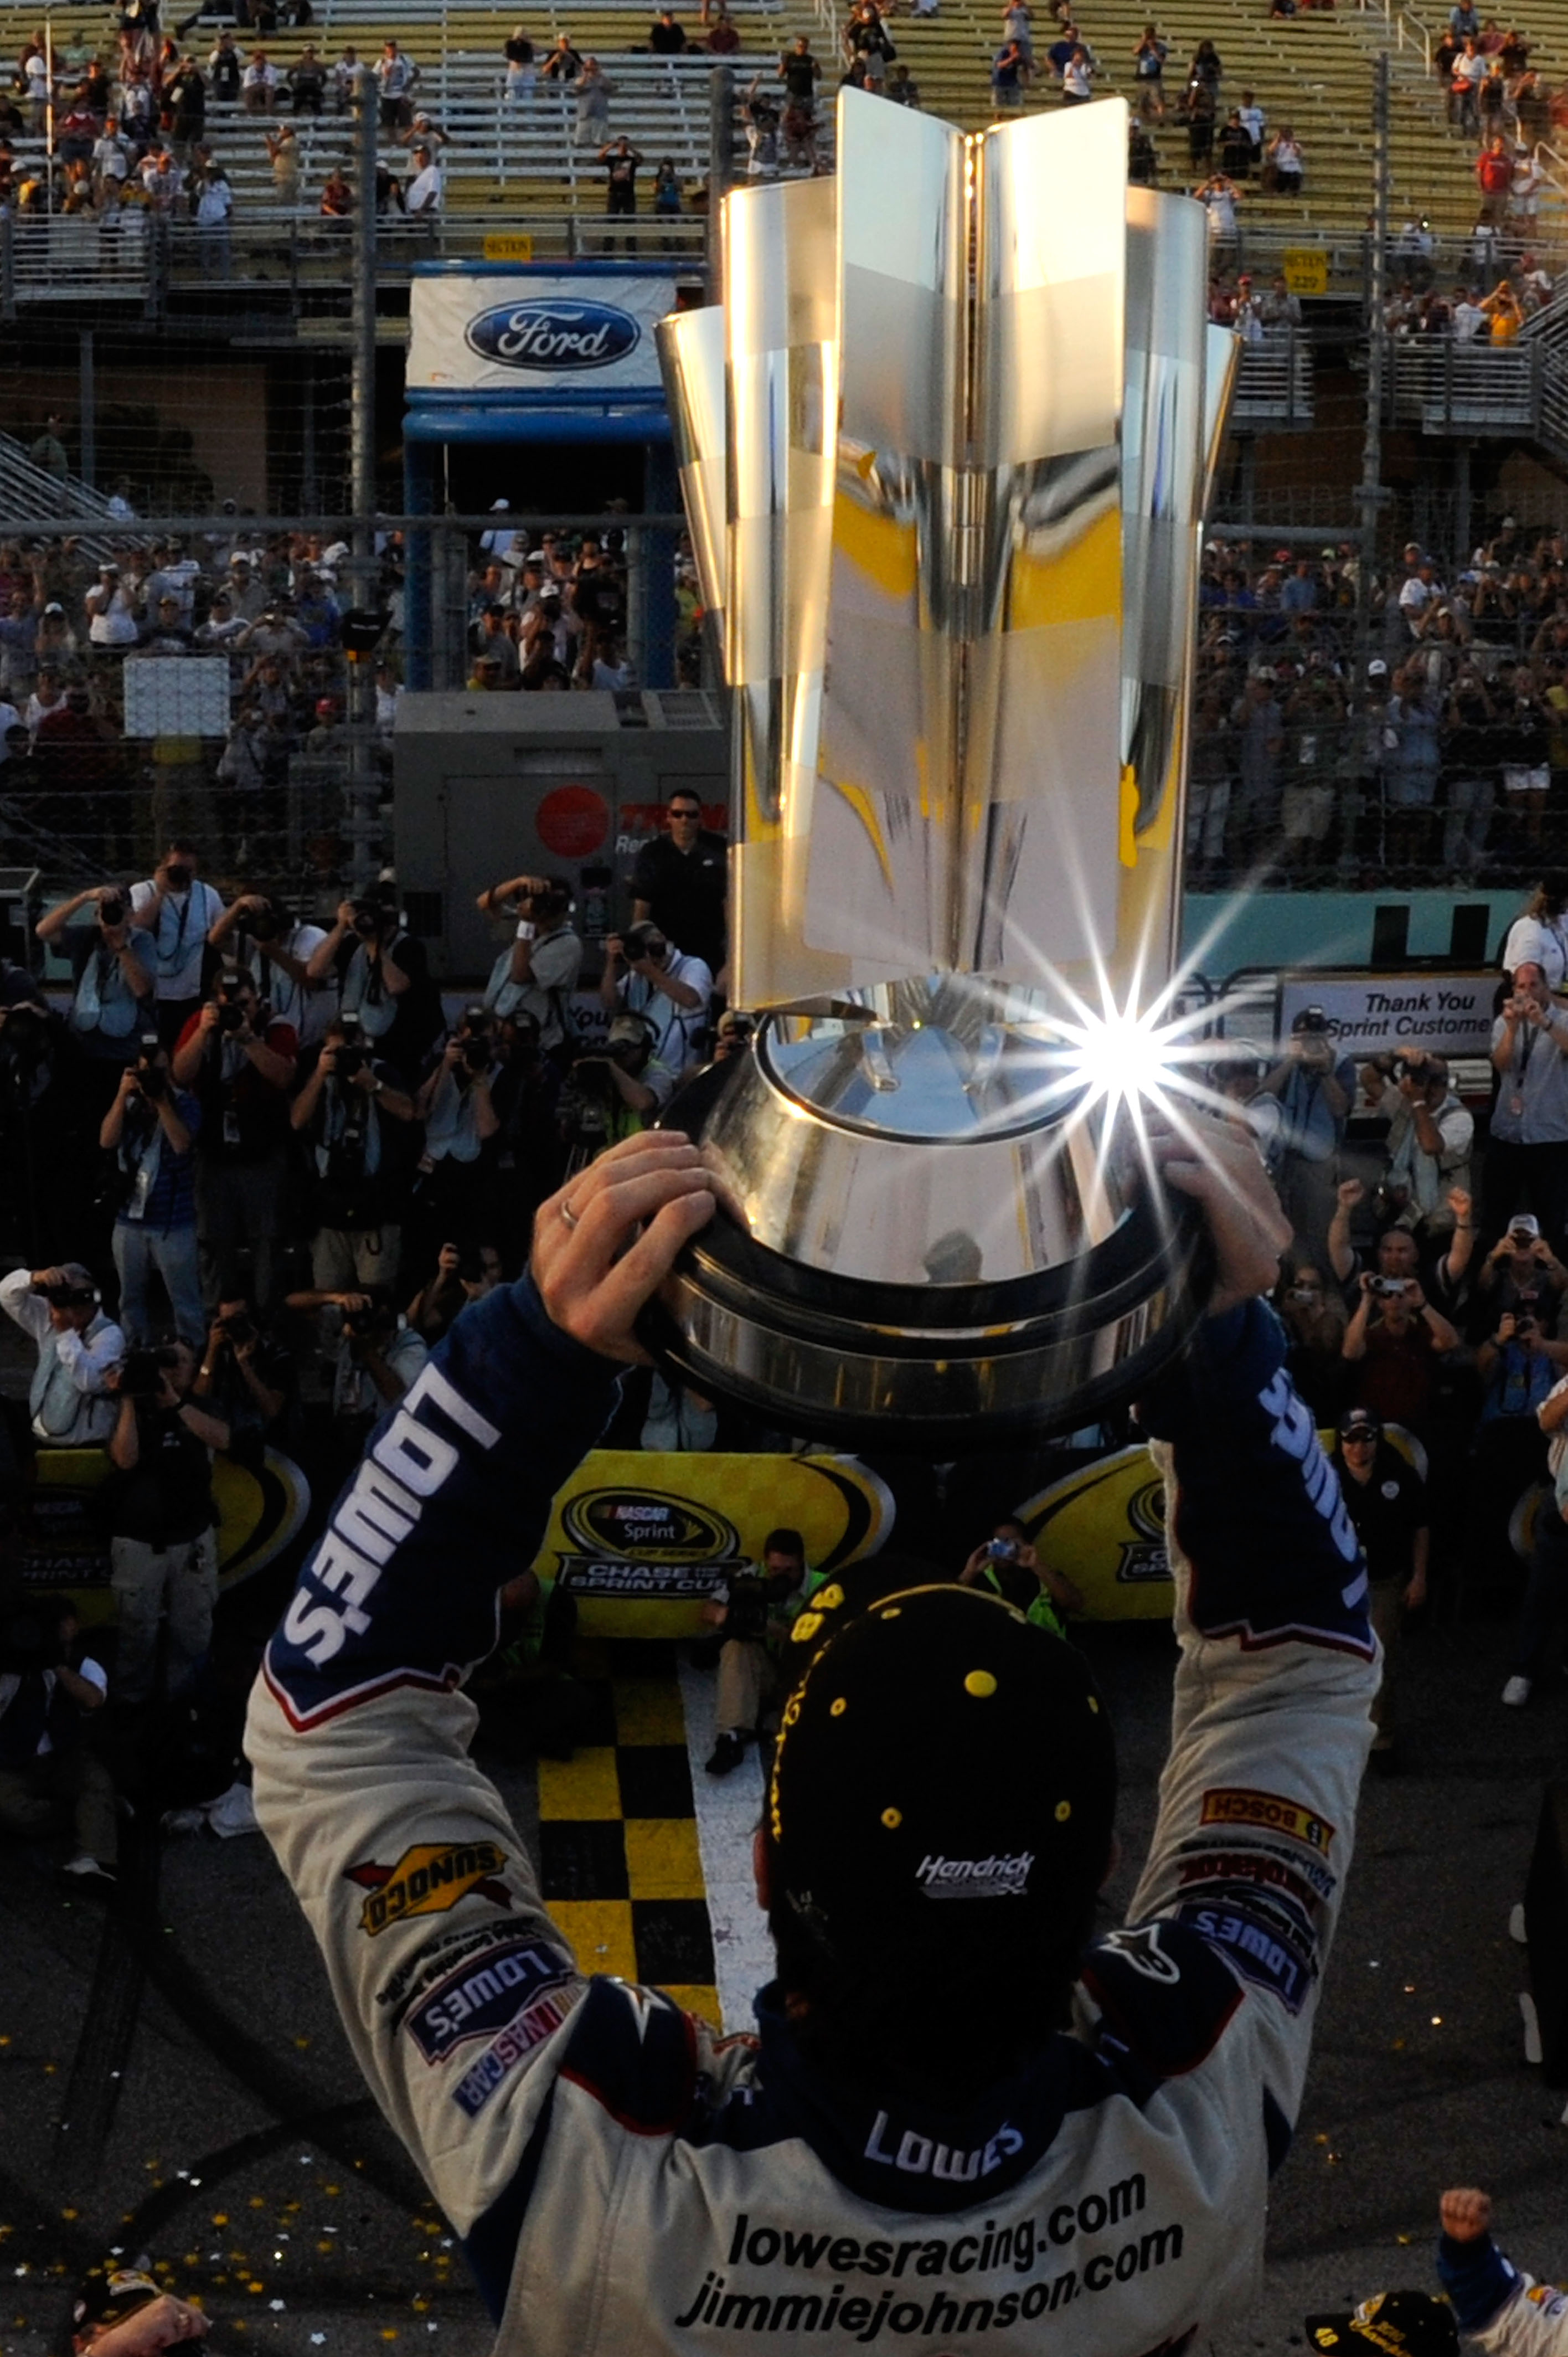 HOMESTEAD, FL - NOVEMBER 21:  Jimmie Johnson, driver of the #48 Lowe's Chevrolet, celebrates by hoisting the trophy after finishing in second place in the Ford 400 to clinch his fifth consecutive NASCAR Sprint Cup championship at Homestead-Miami Speedway 